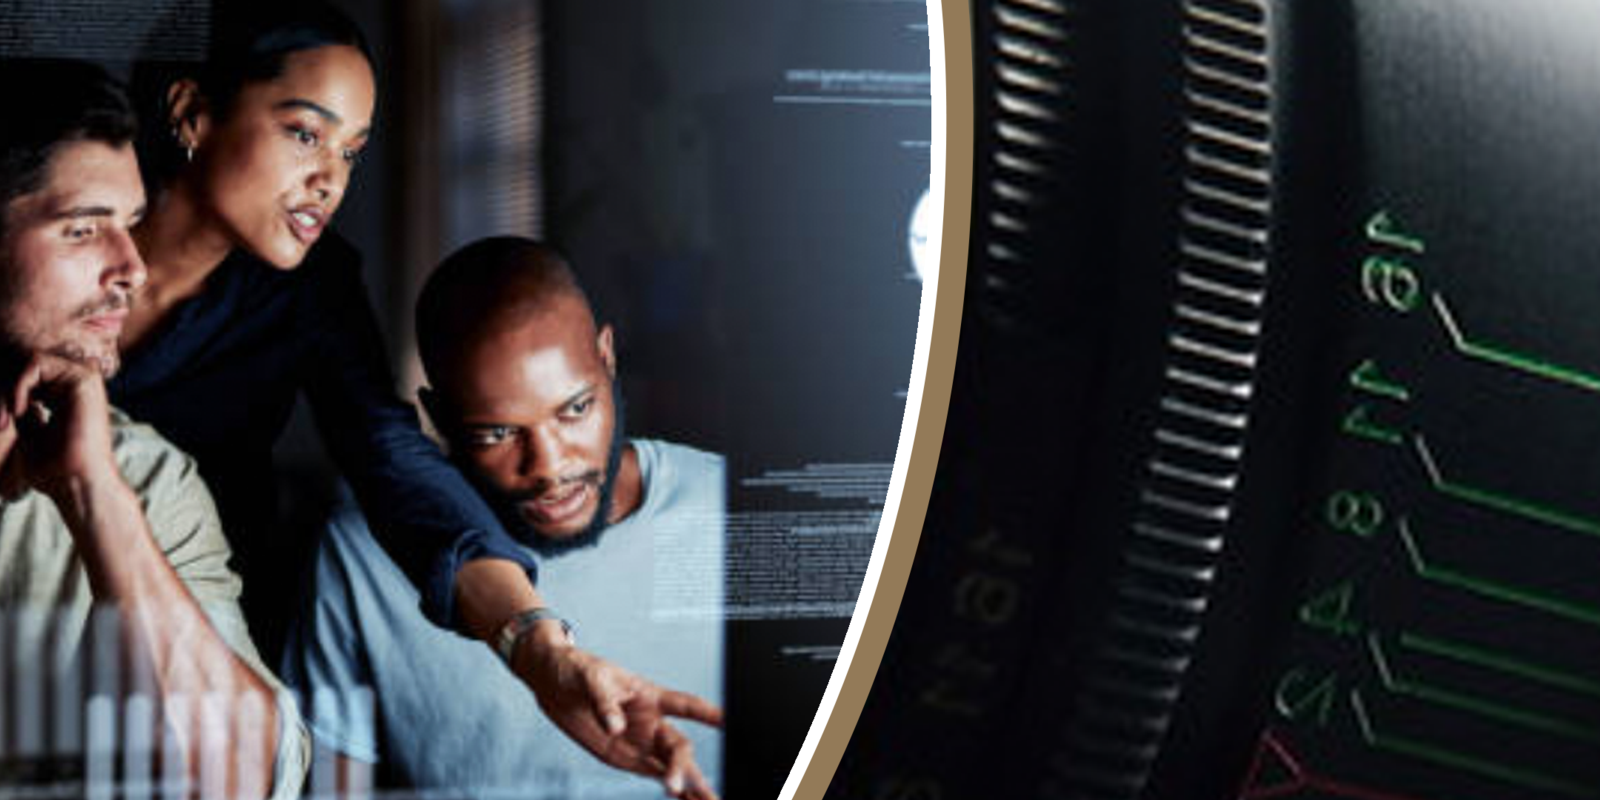 An adjustable camera lens focusing on An African American male, African American Female, and Caucasian male studying a computer screen. Source code overlaps the monitor.